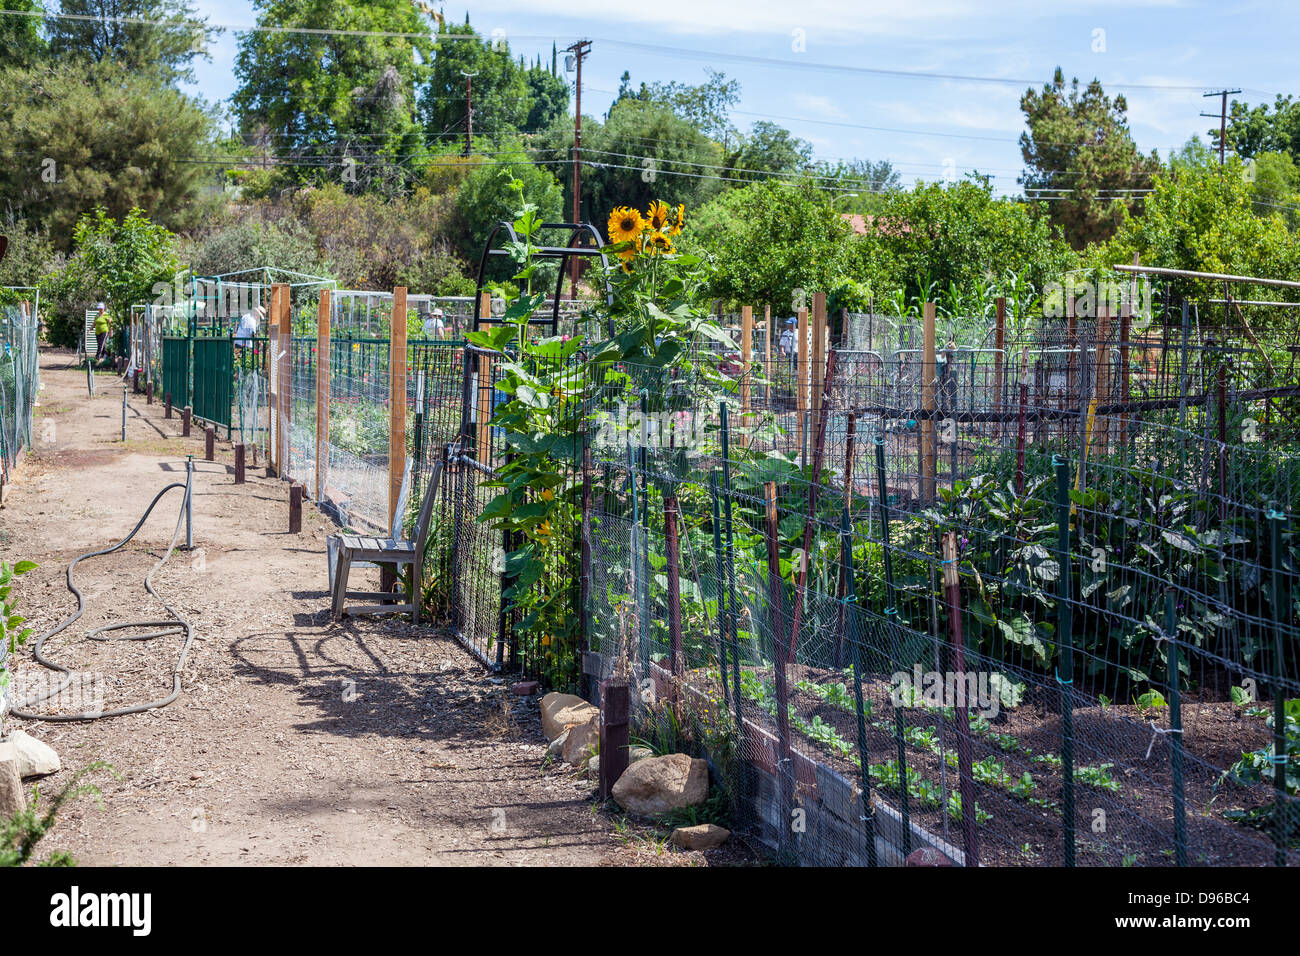 Community Gardens At Orcutt Ranch In Los Angeles In The San